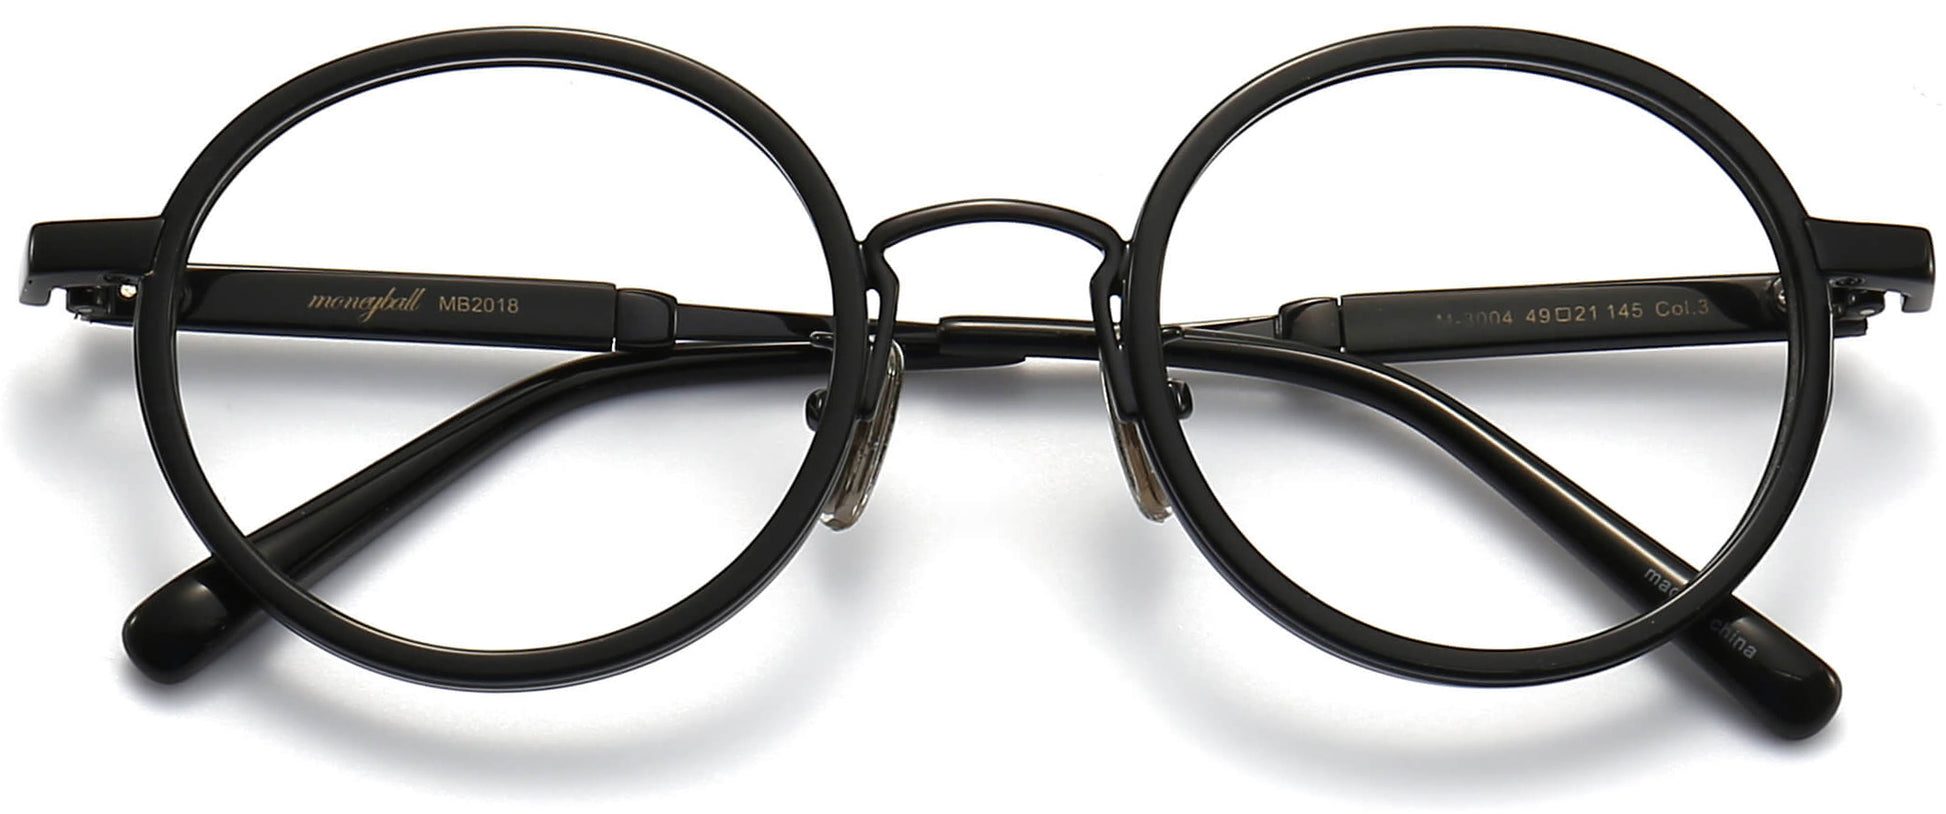 Vicente Round Black Eyeglasses from ANRRI, closed view